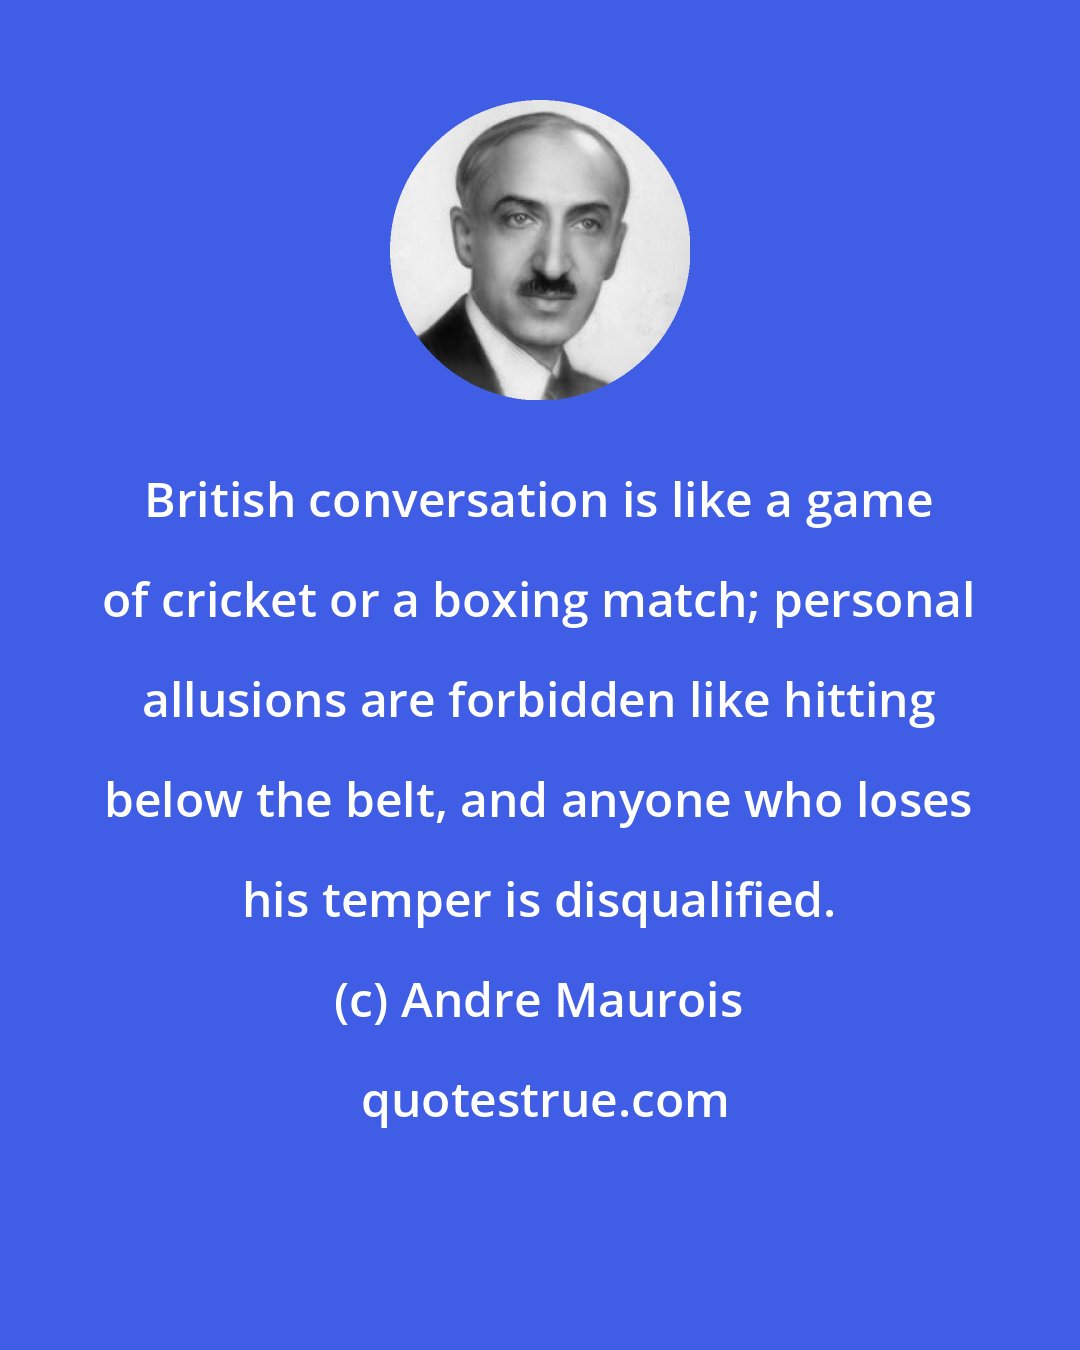 Andre Maurois: British conversation is like a game of cricket or a boxing match; personal allusions are forbidden like hitting below the belt, and anyone who loses his temper is disqualified.